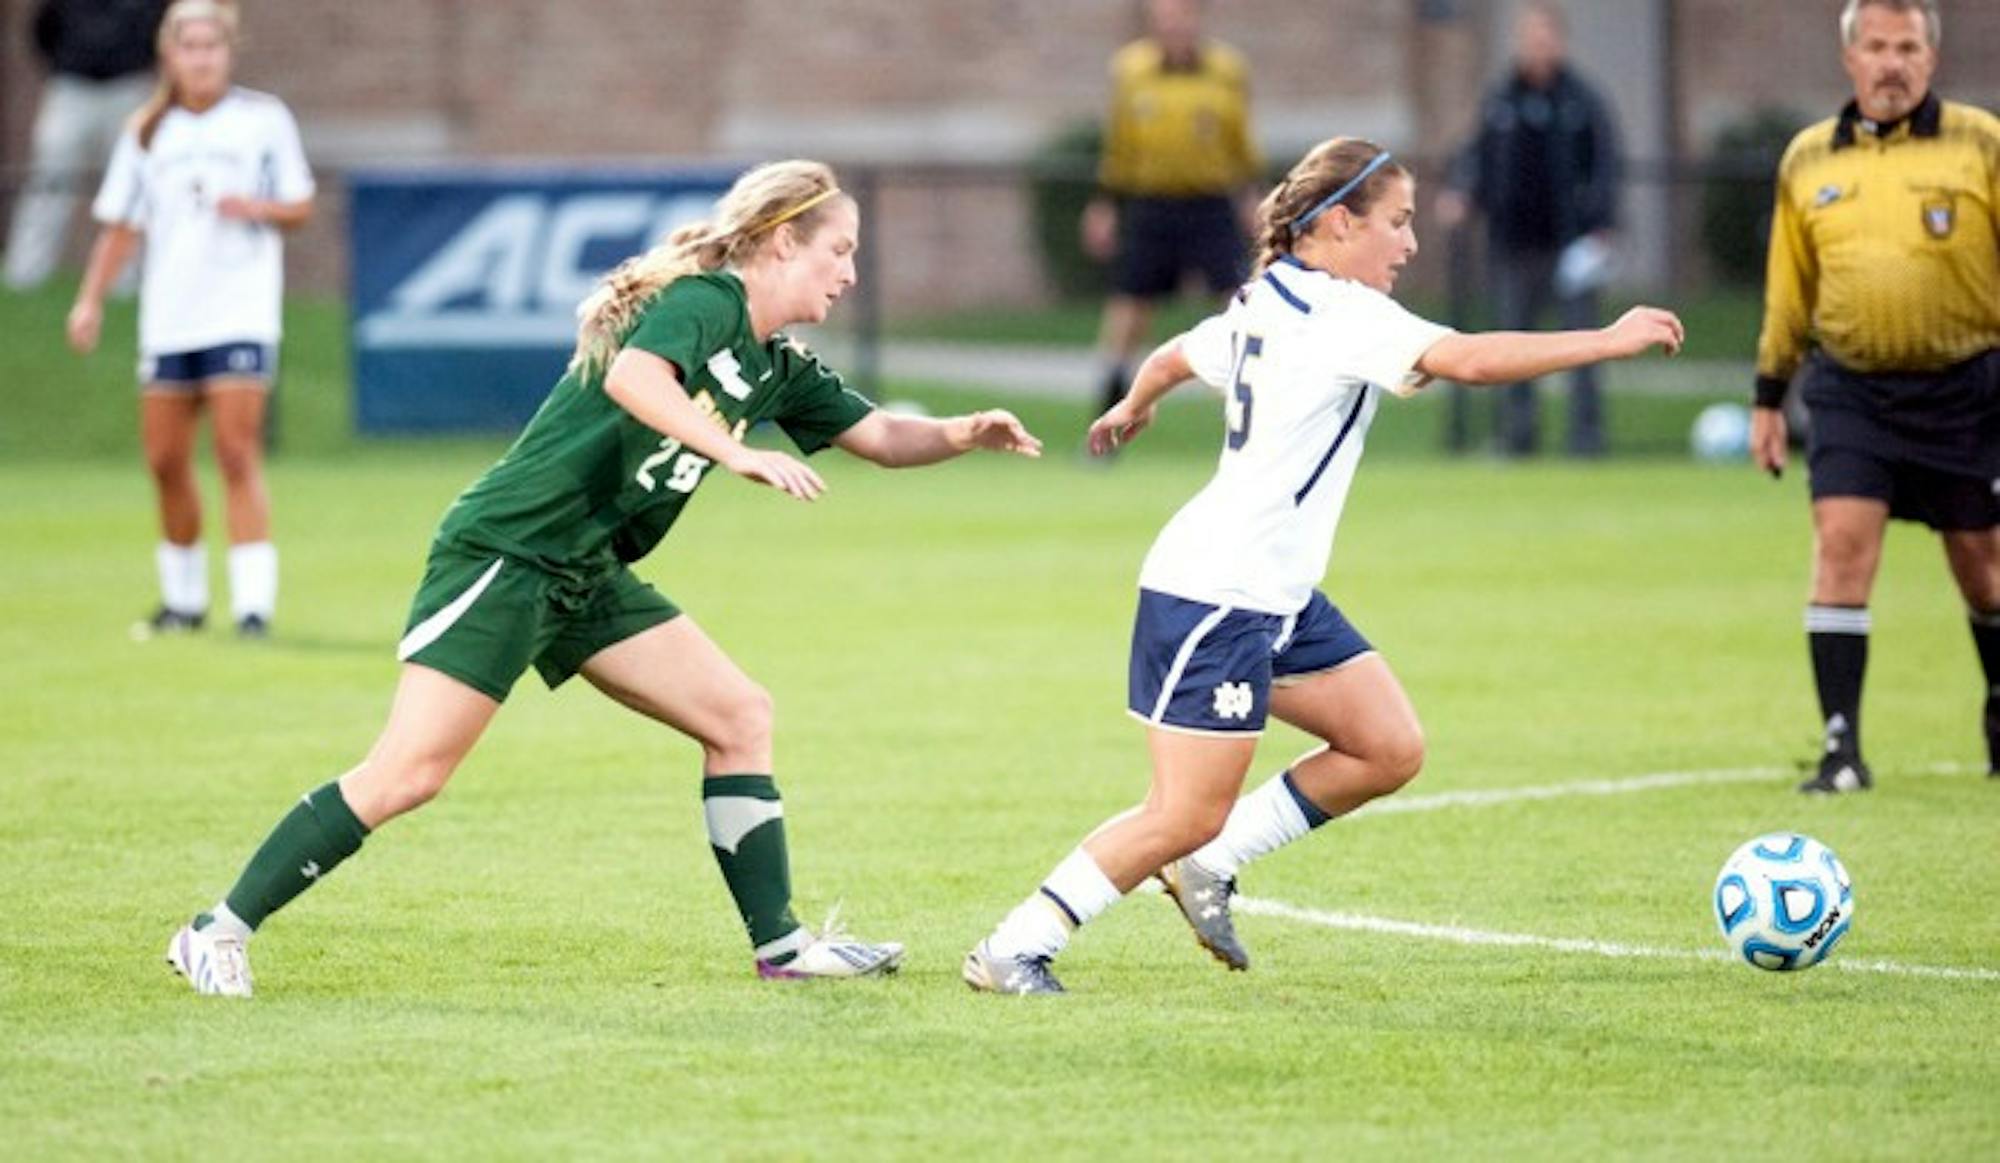 Irish freshman defender Sabrina Flores keeps an attacker away from the ball during Notre Dame's 1-0 victory over Baylor on Sept. 12 at Alumni Stadium.